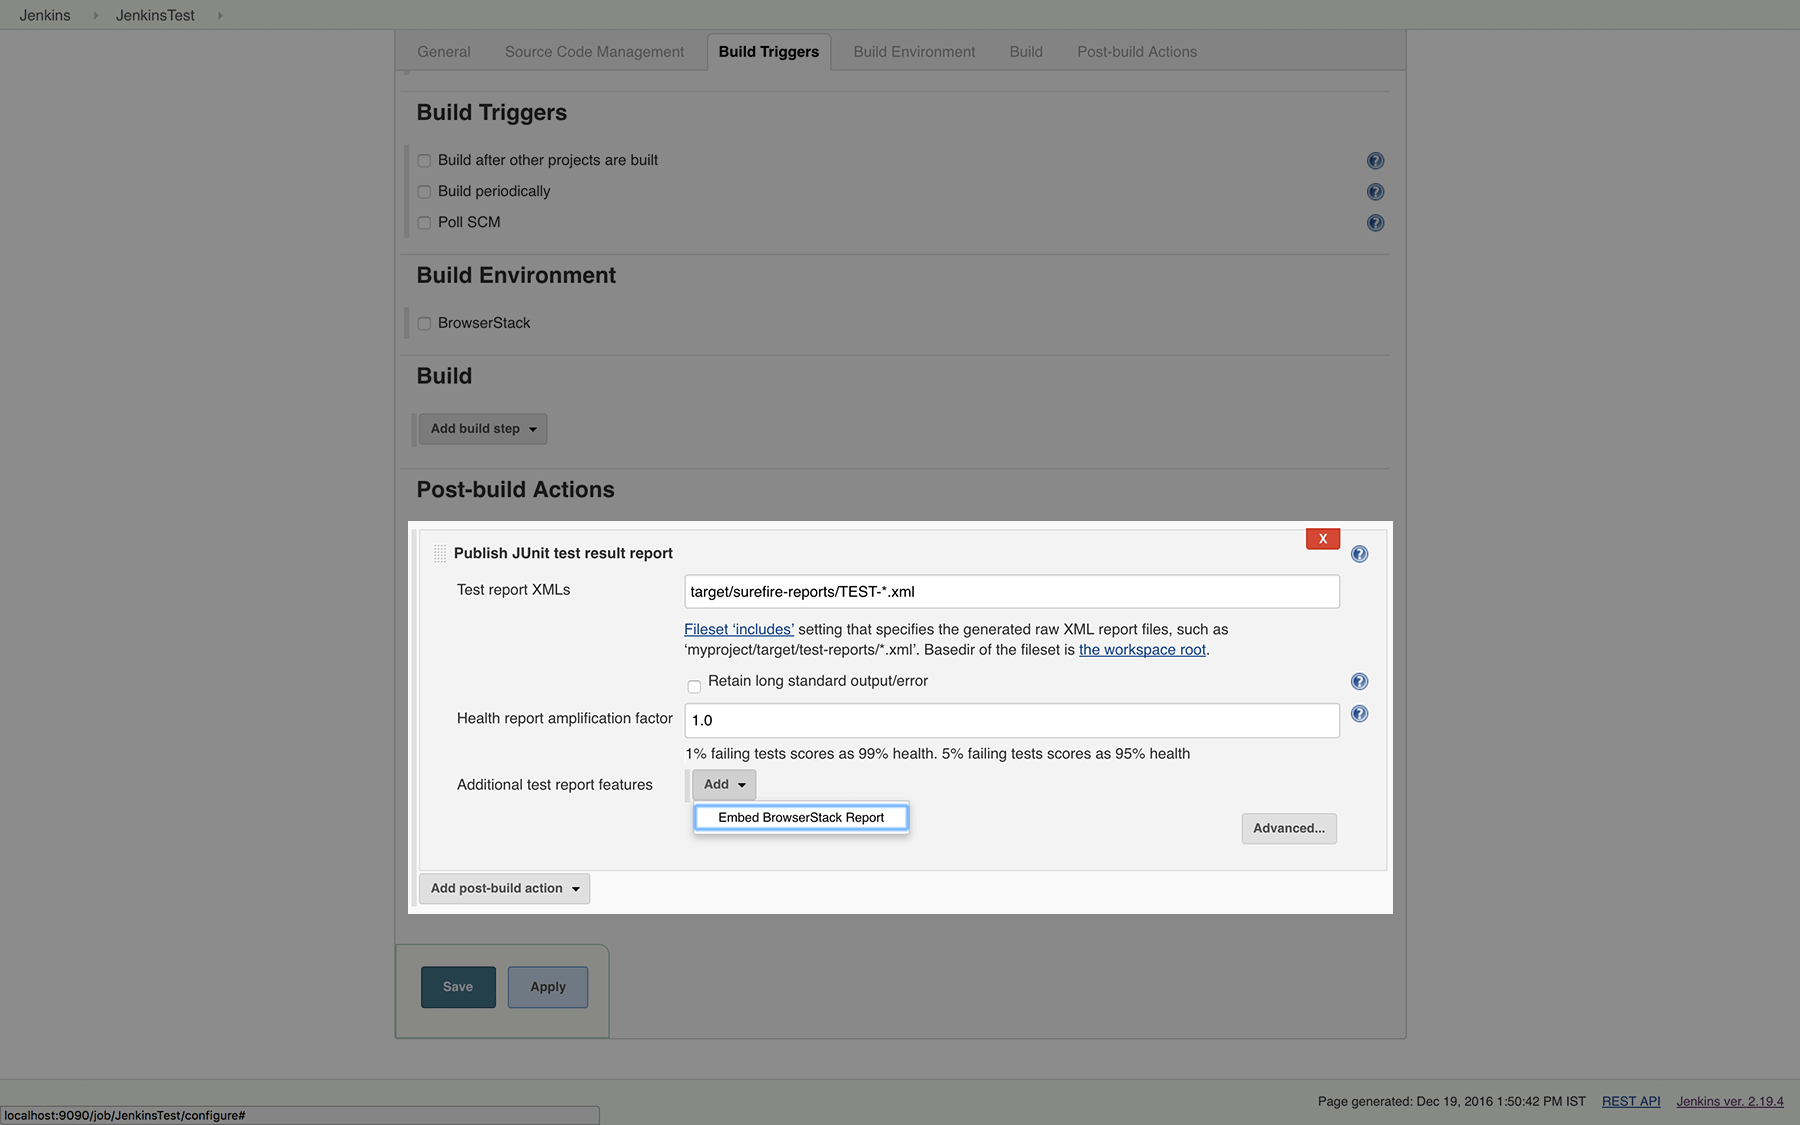 Embedding BrowserStack reports in additional test report features section